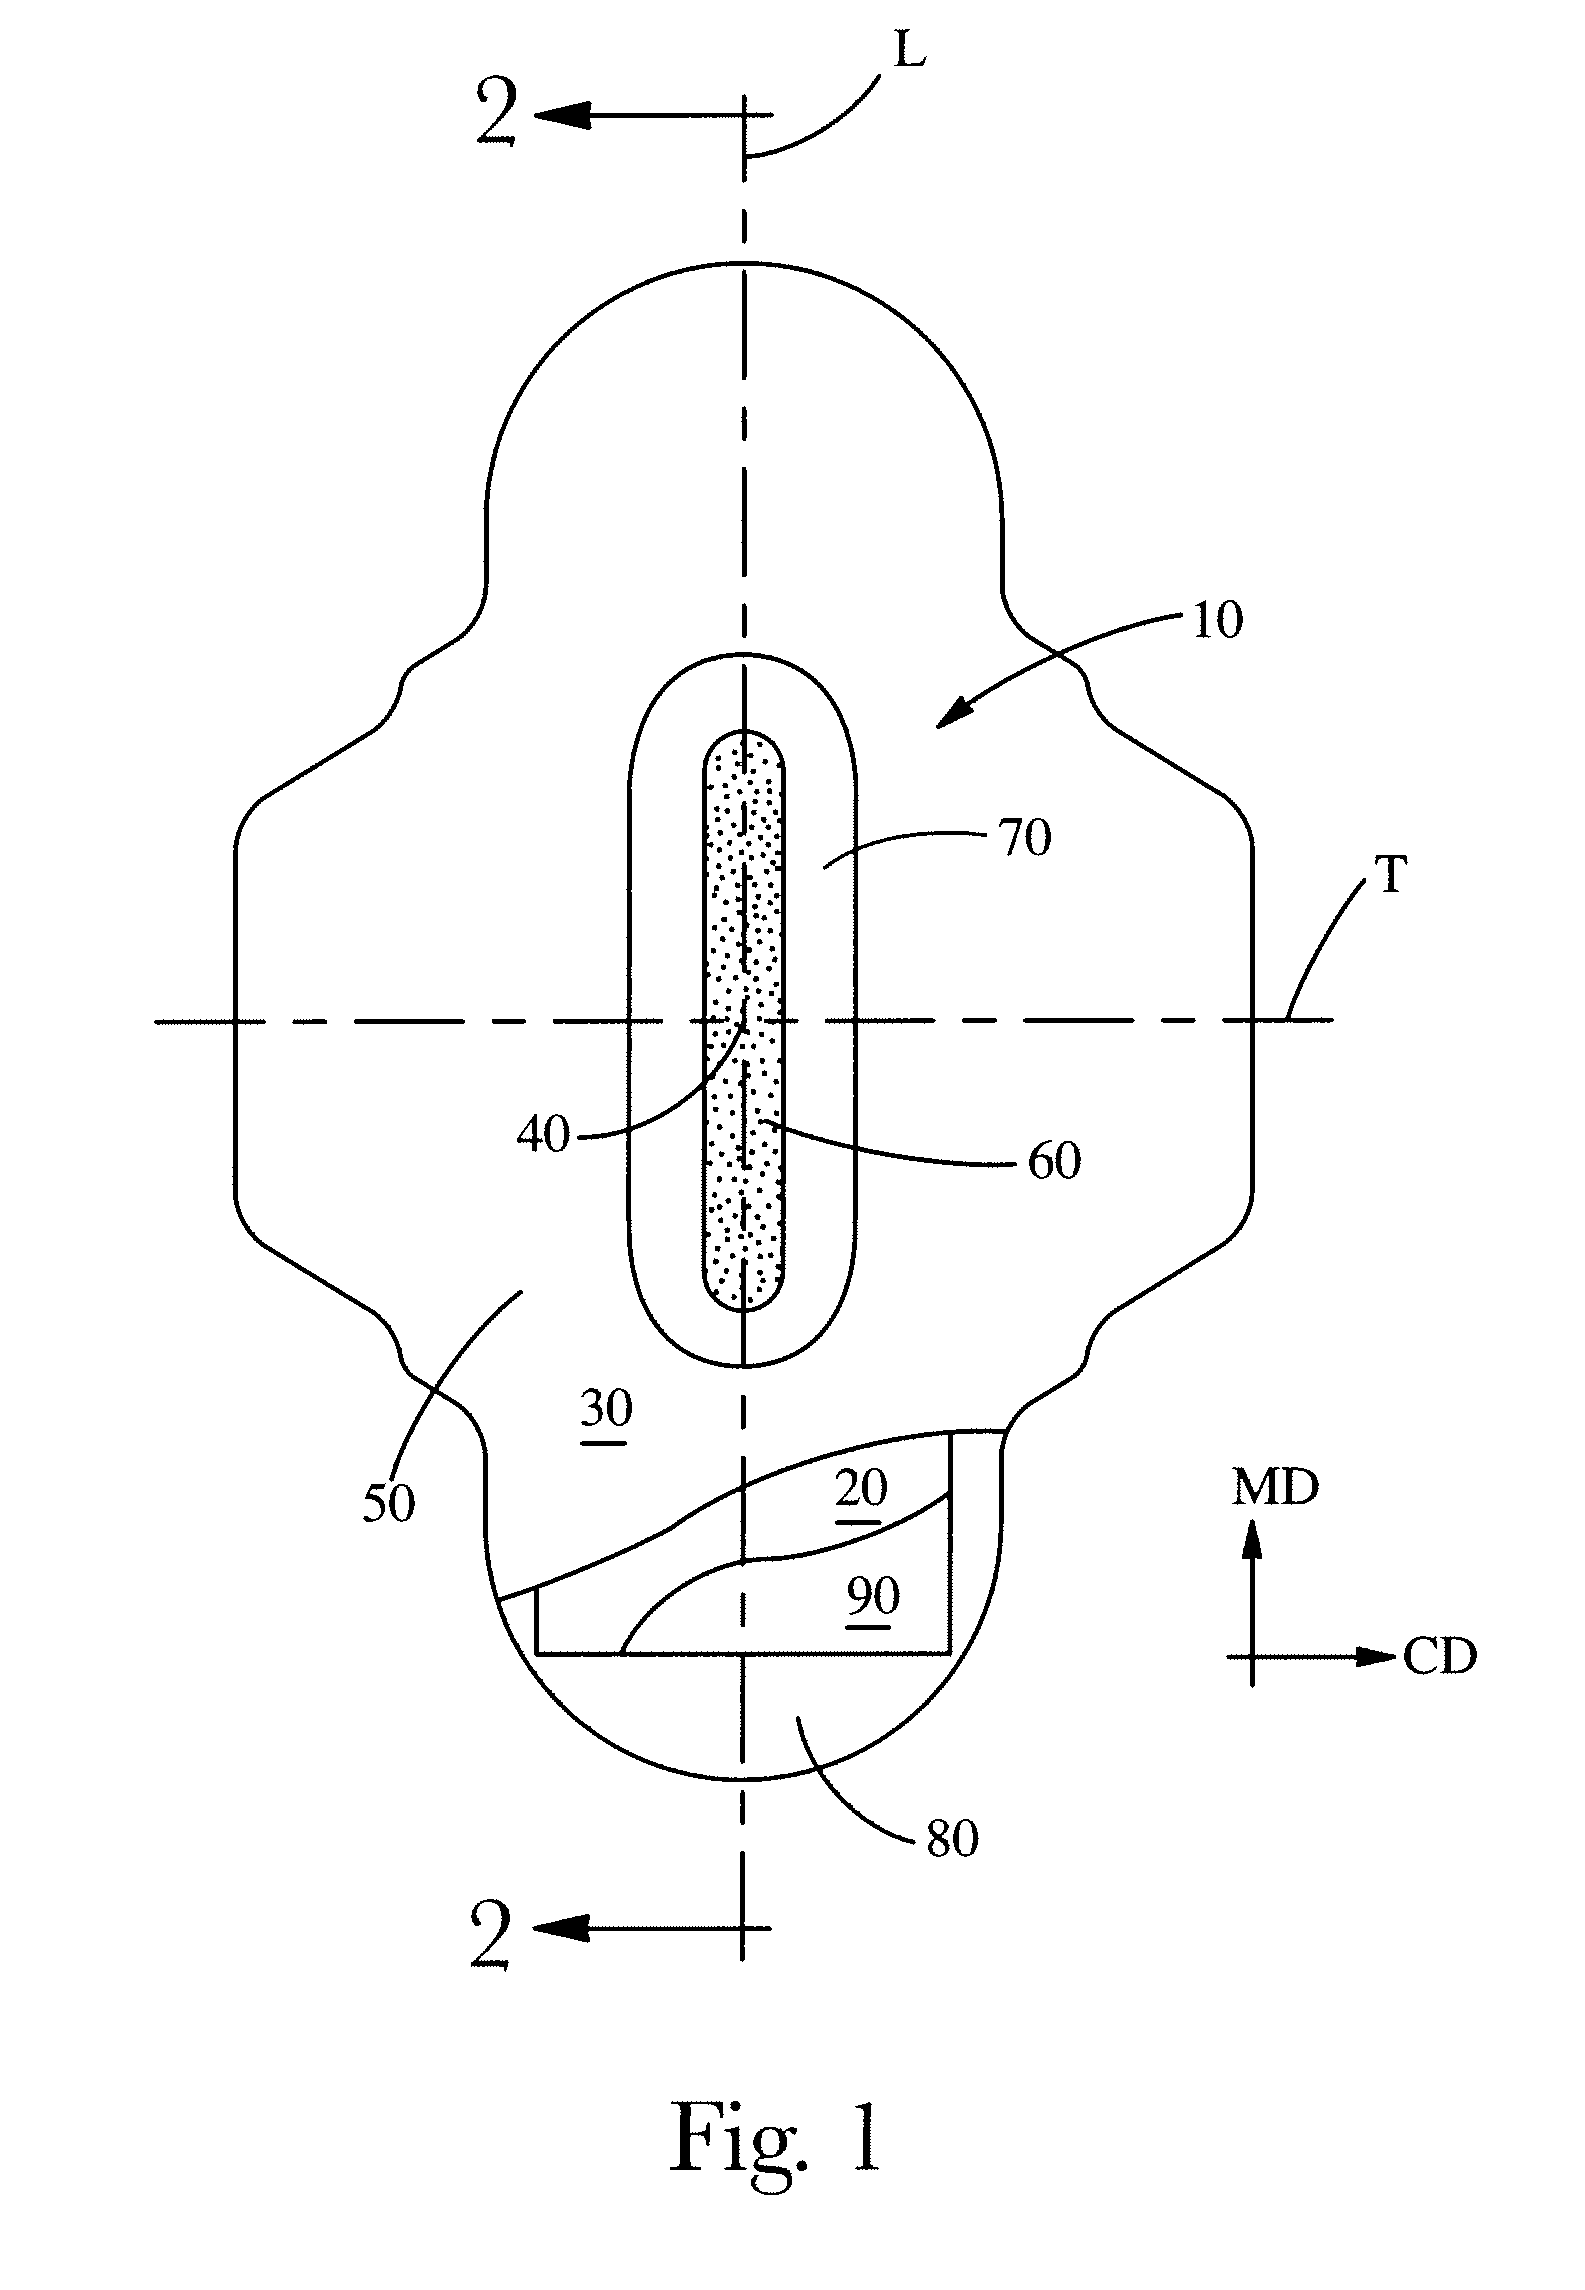 Method of producing color change in overlapping layers